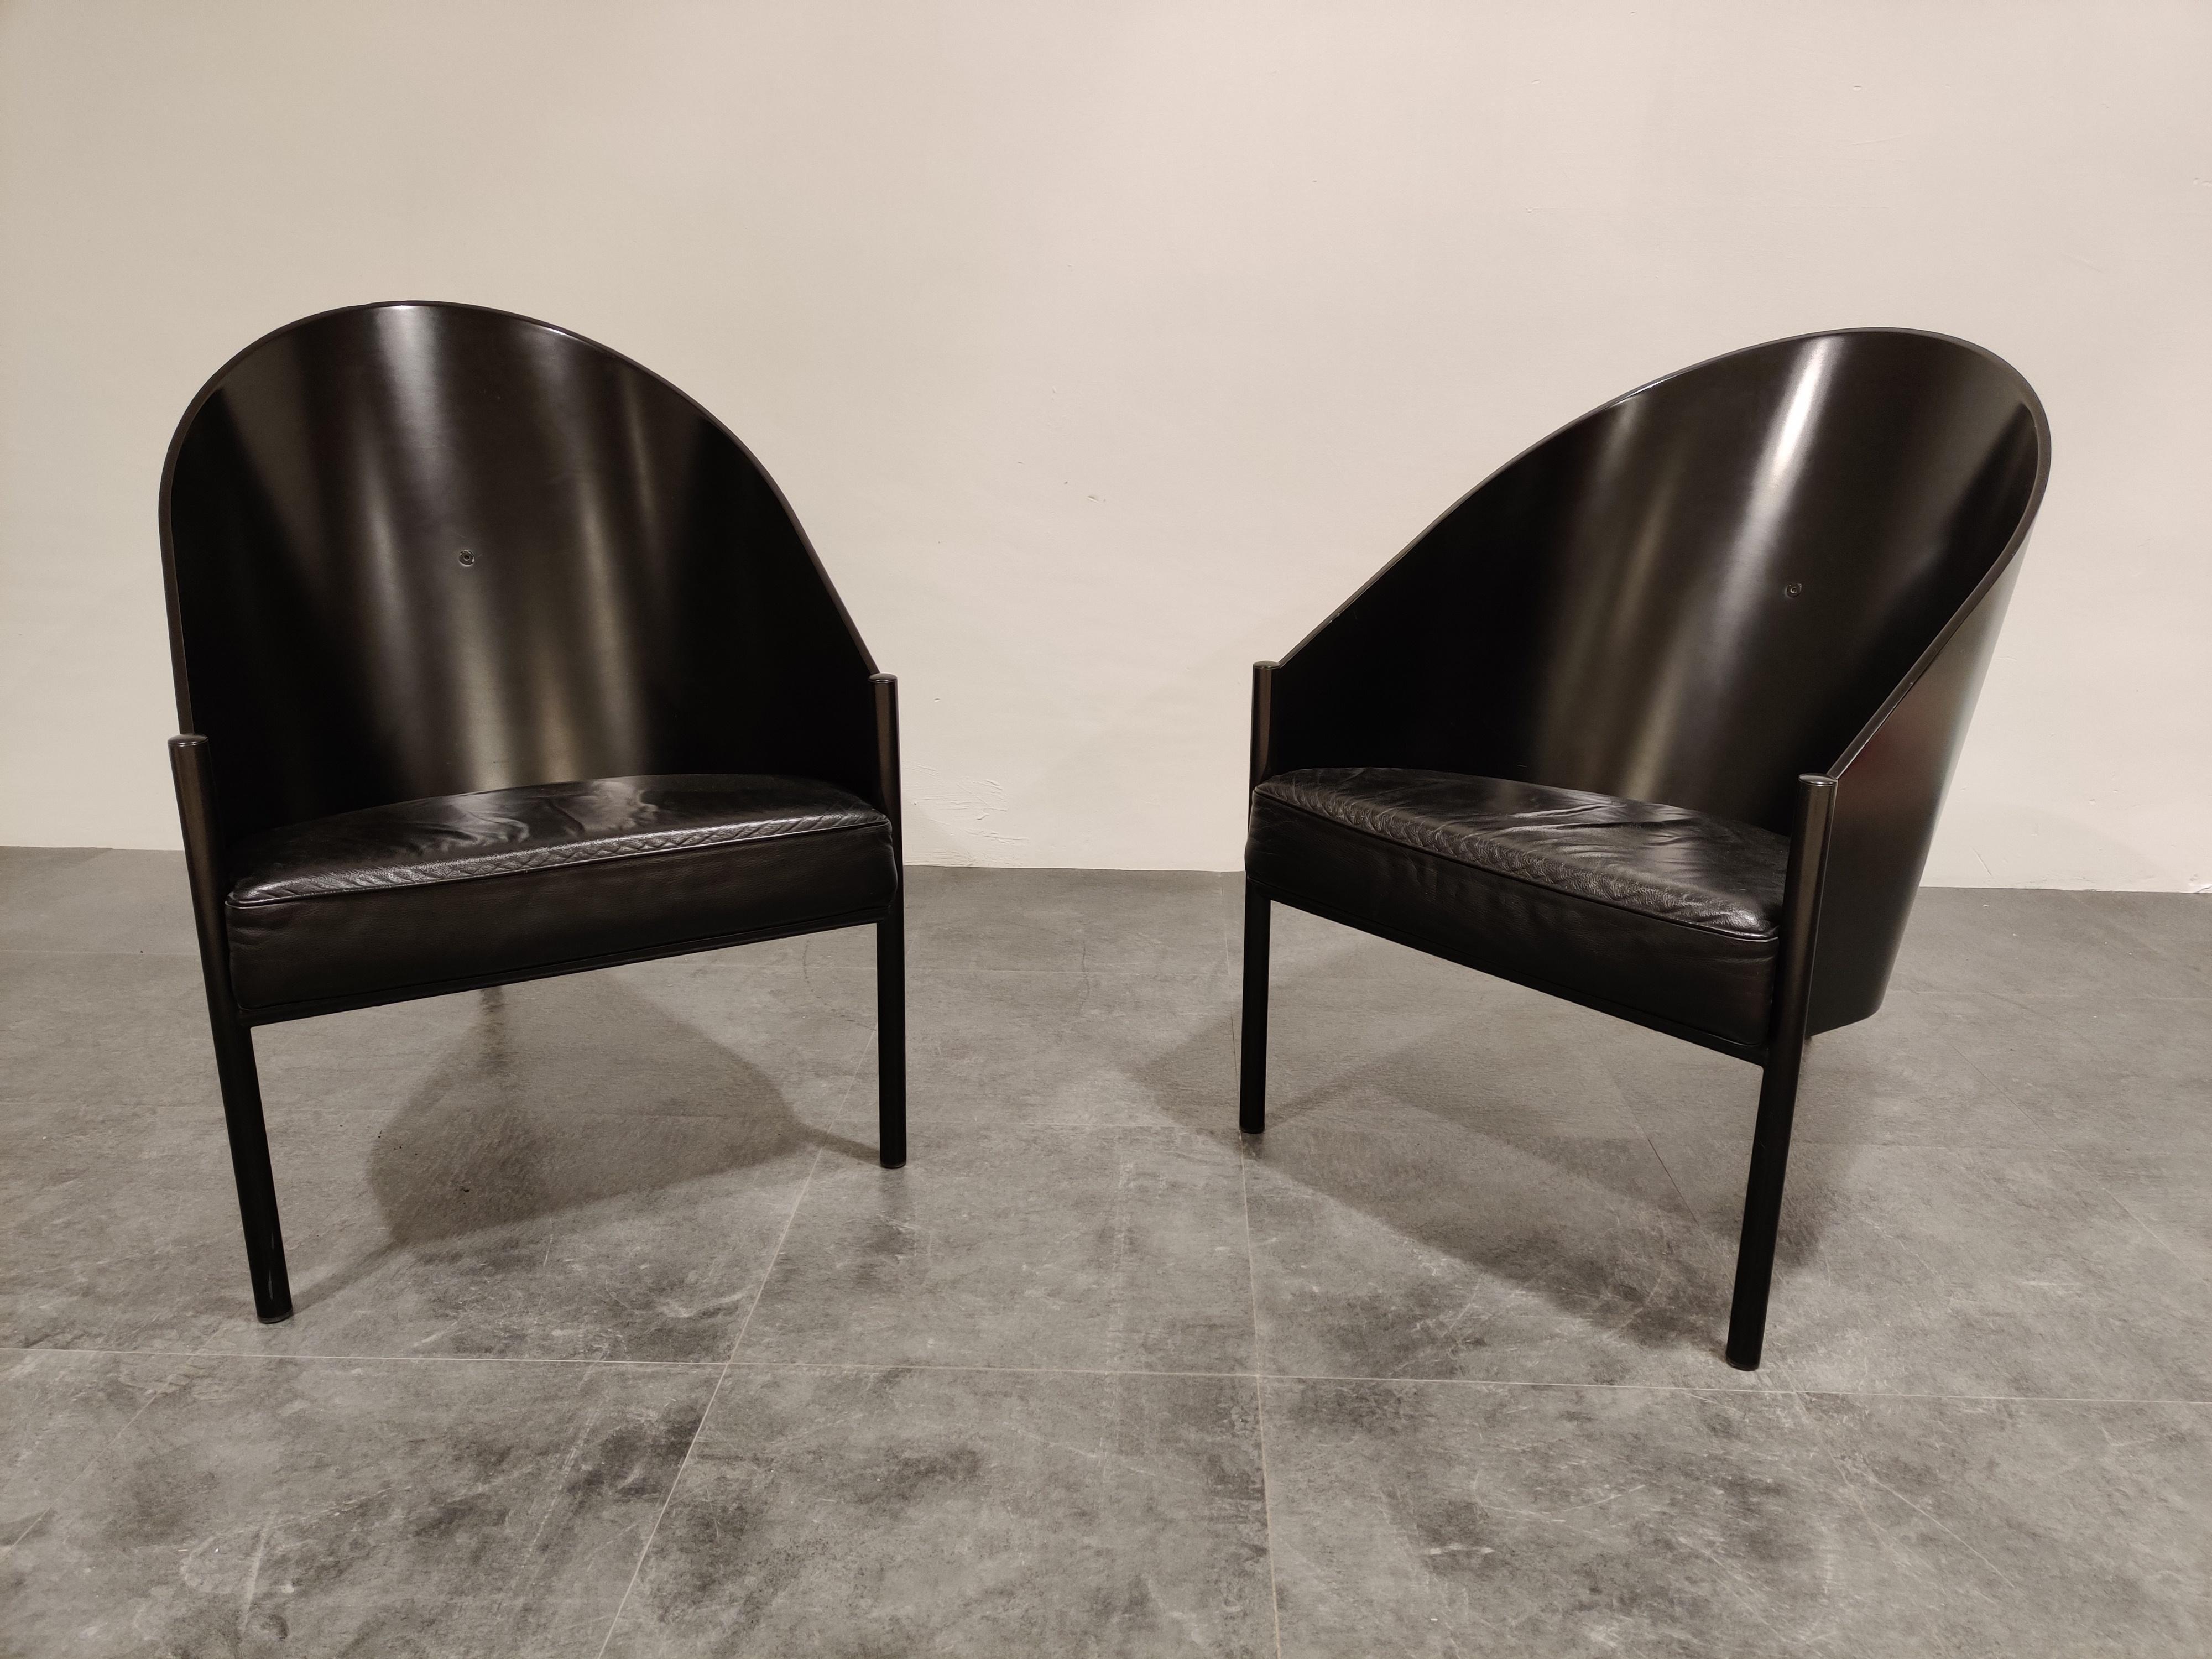 Pair of rare 'pratfall' lounge chairs designed by Philippe Starck for Aleph.

These chairs were designed in 1982 and are a large version of the Costes dining chairs designed for the Café costes in Paris.

Beautiful elegant and timeless